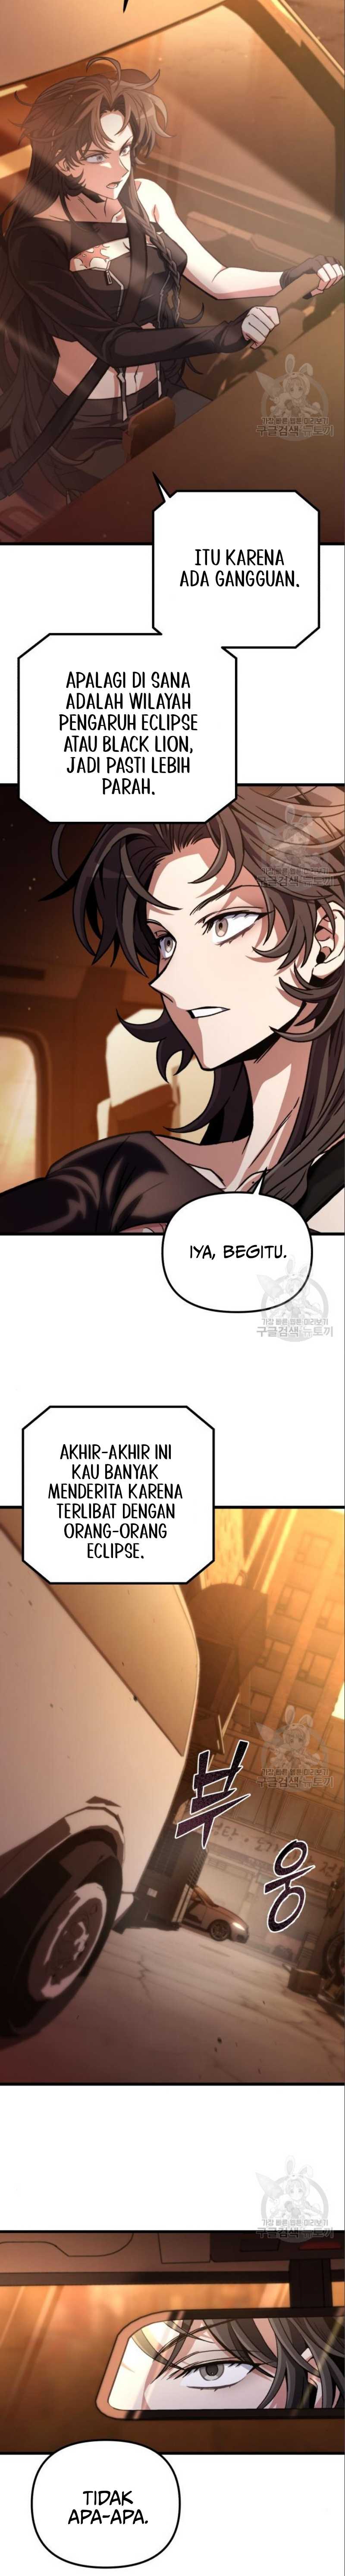 The Genius Assassin Who Takes it All Chapter 07